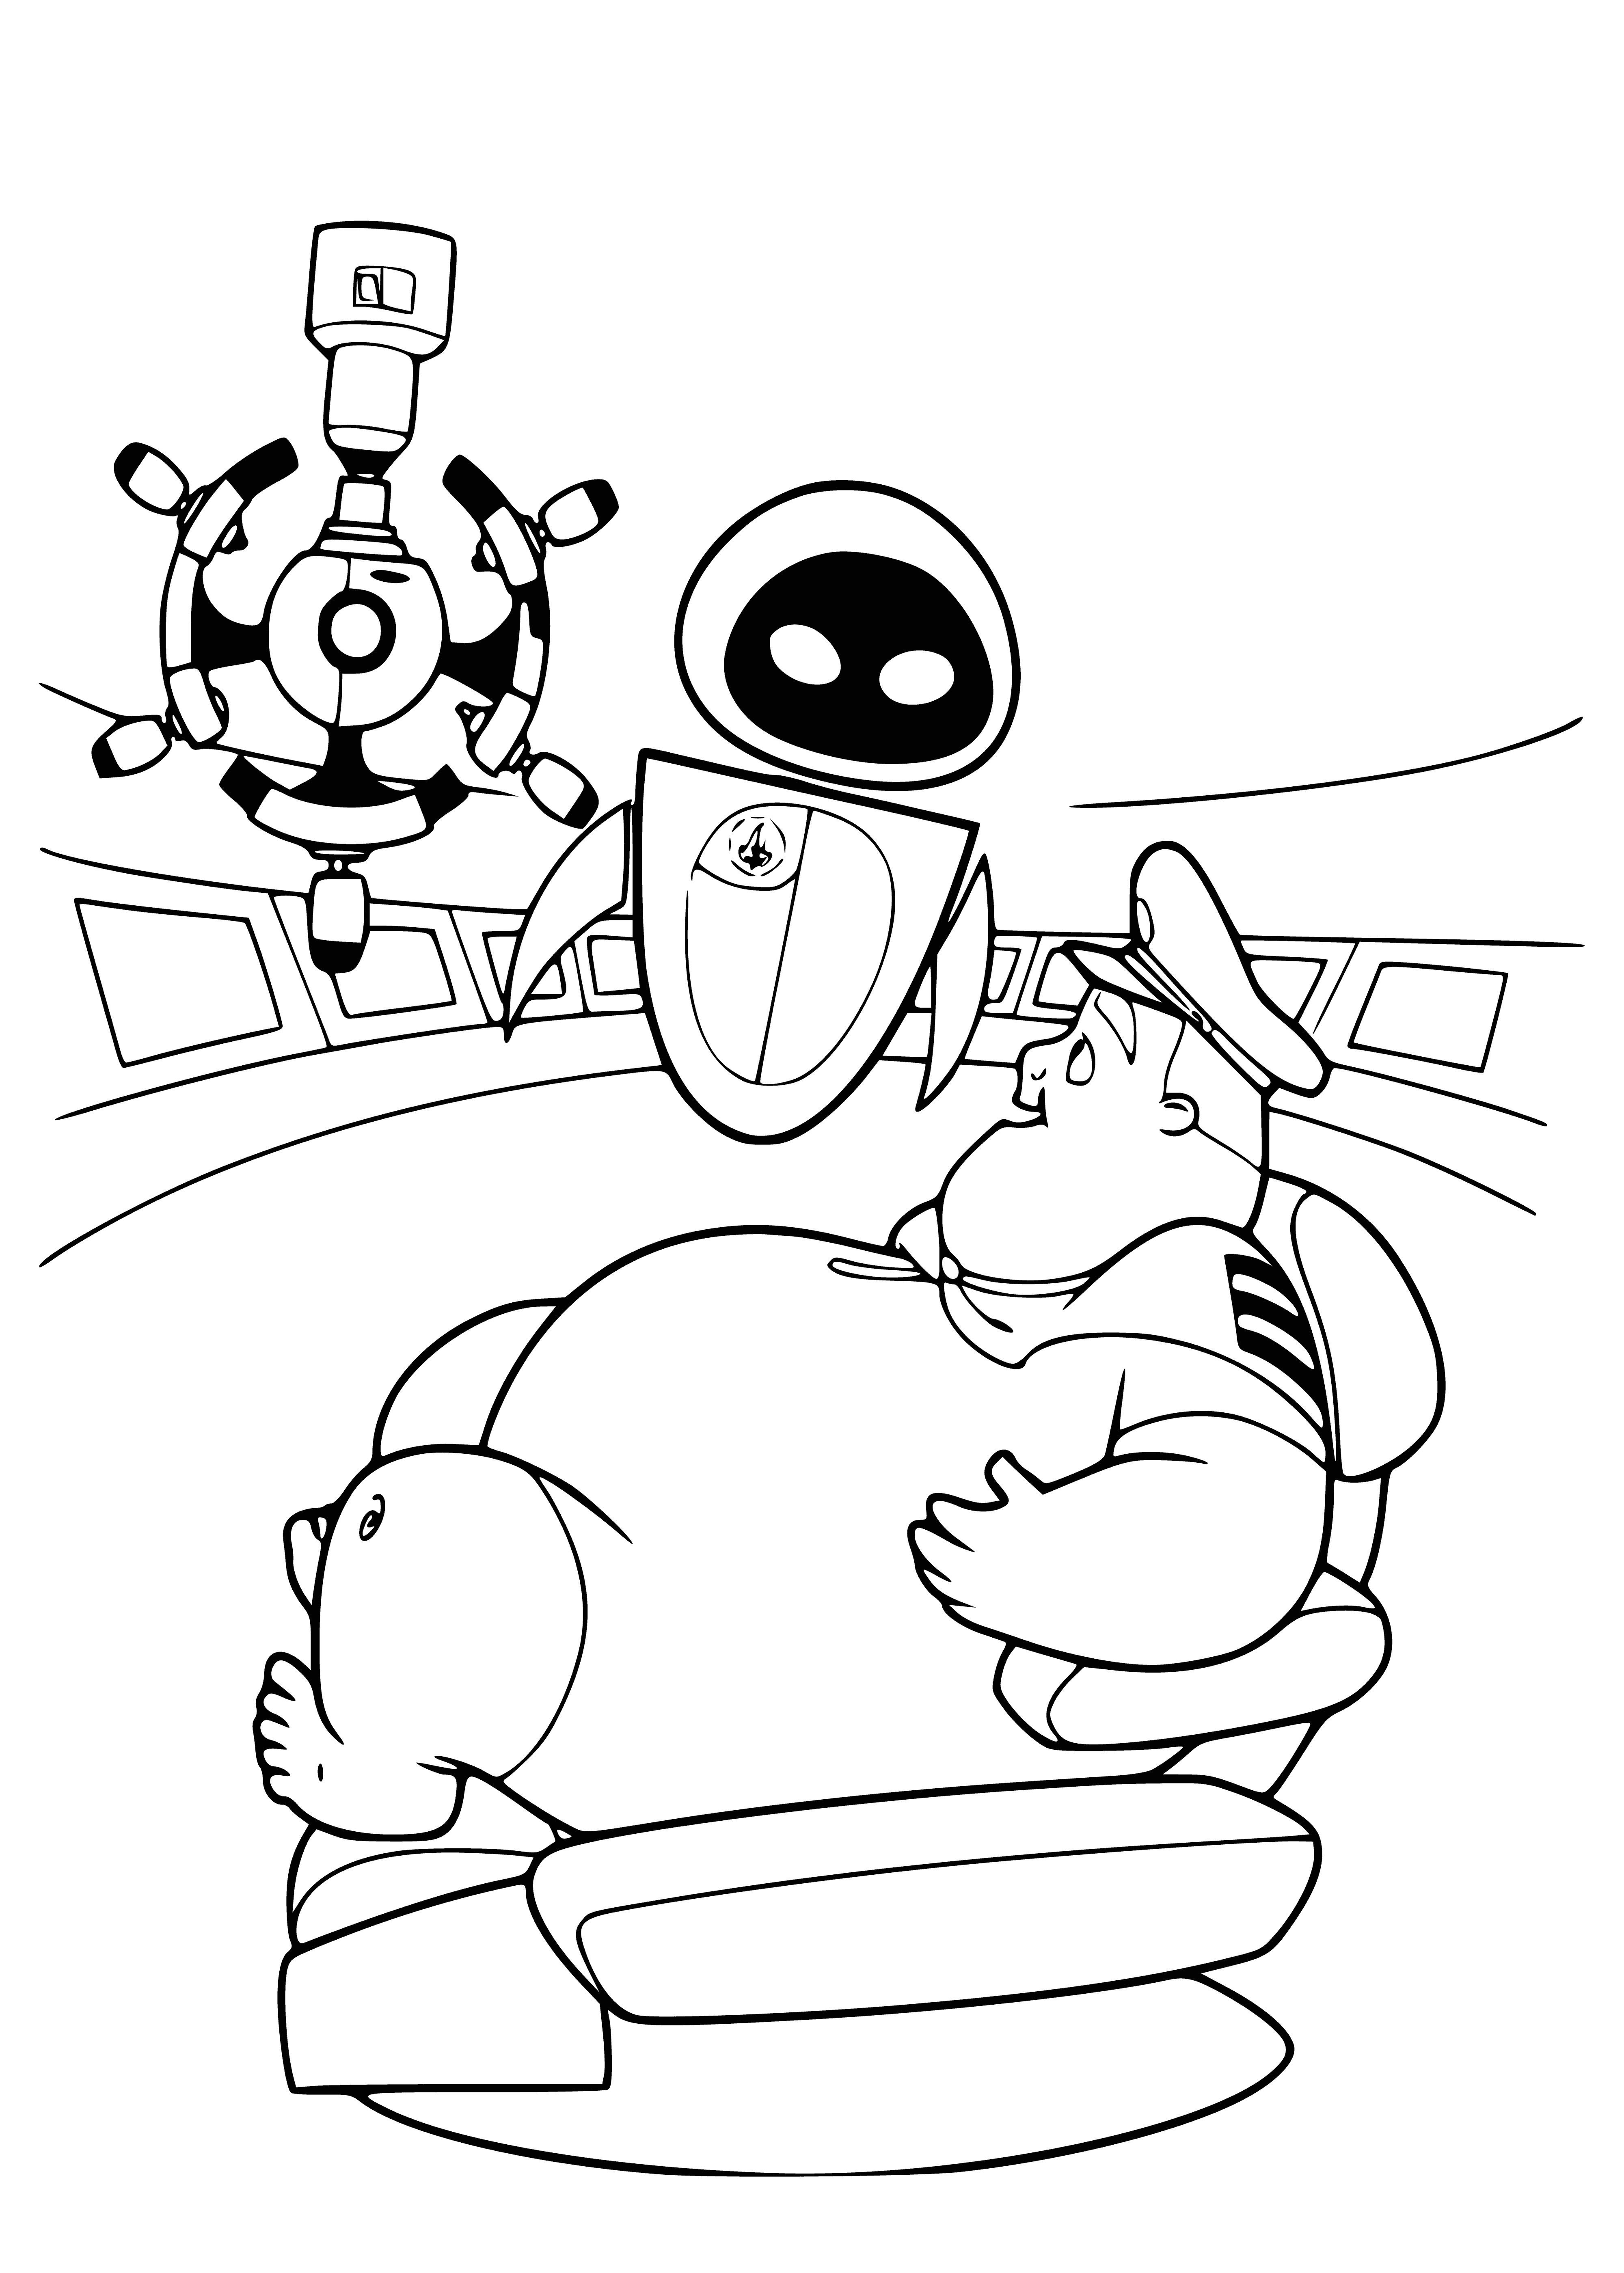 coloring page: Wall-e and Eva in love, holding hands; Captain smiling nearby. #Lovestory